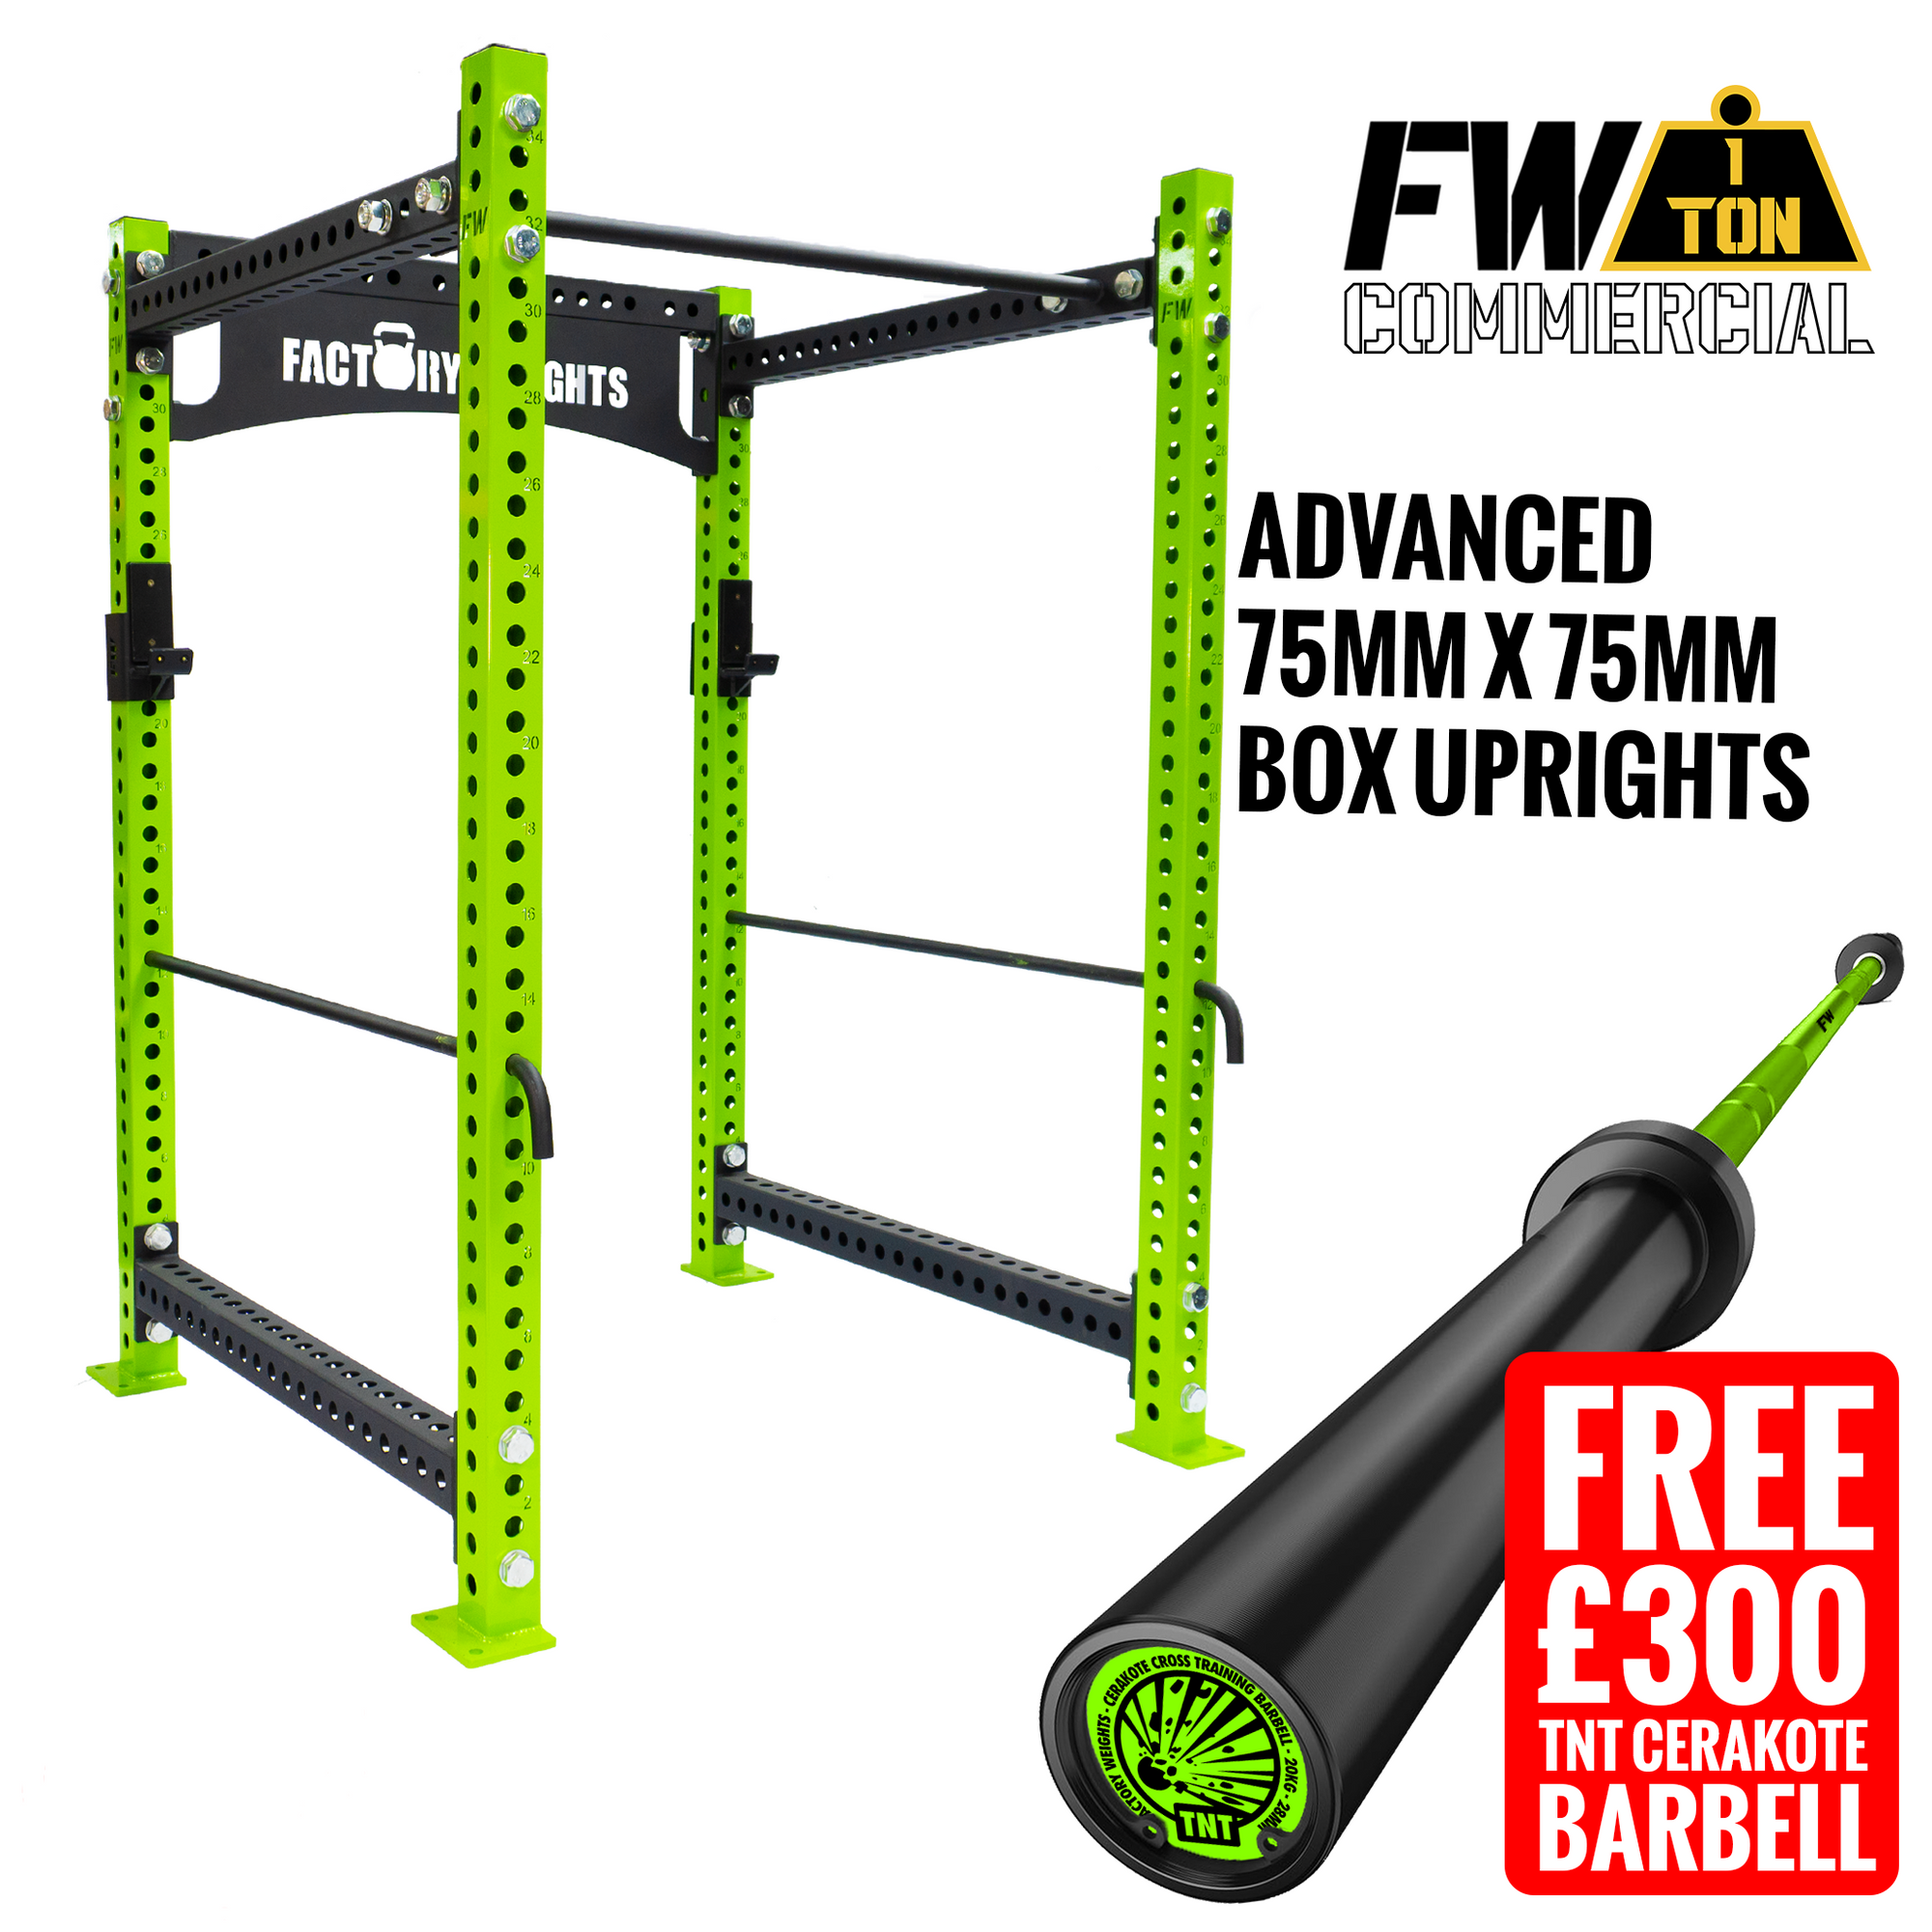 Short Power Rack with Free Cerakote Barbell